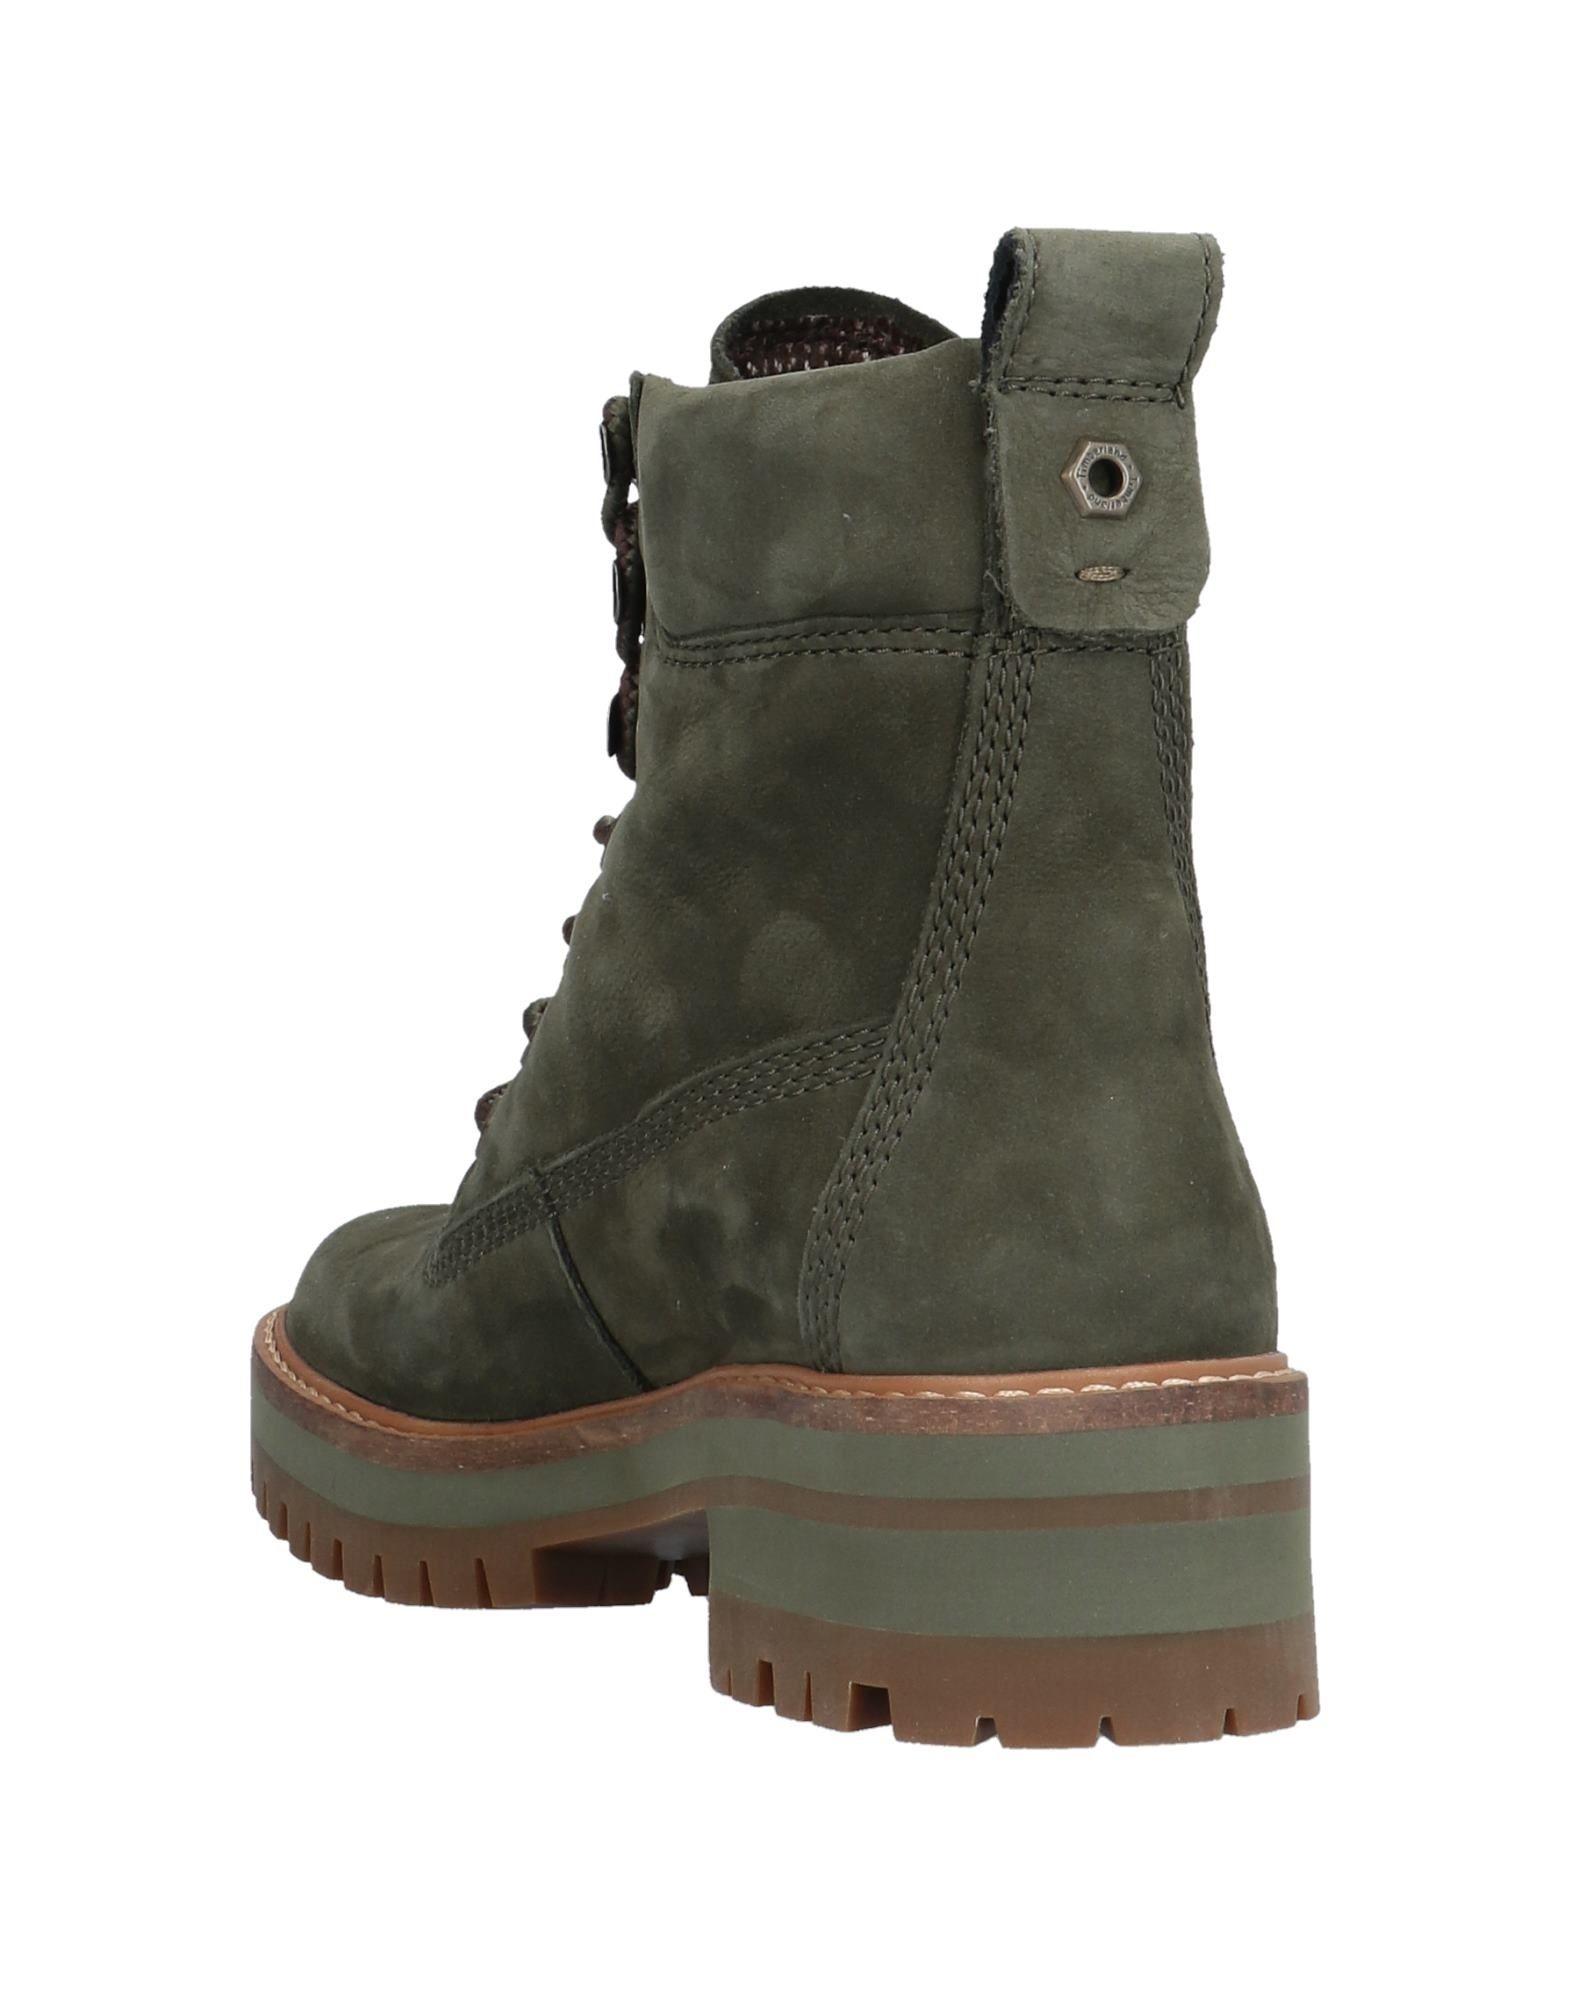 Timberland Suede Ankle Boots in Military Green (Green) - Lyst